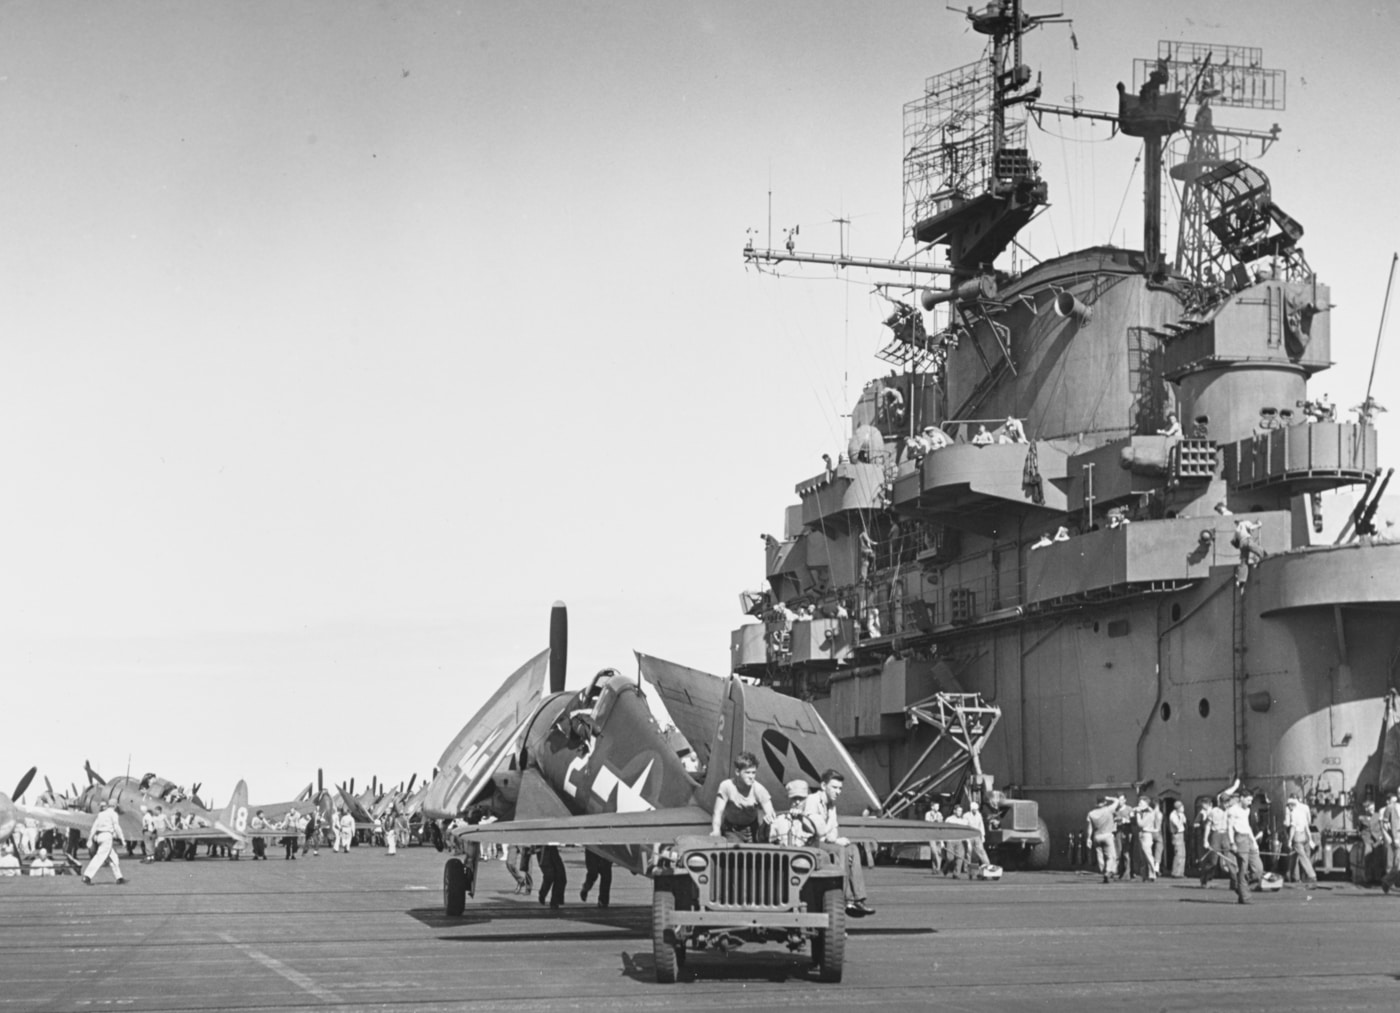 aircraft operations on the uss essex frf-3 hellcat fighter plane